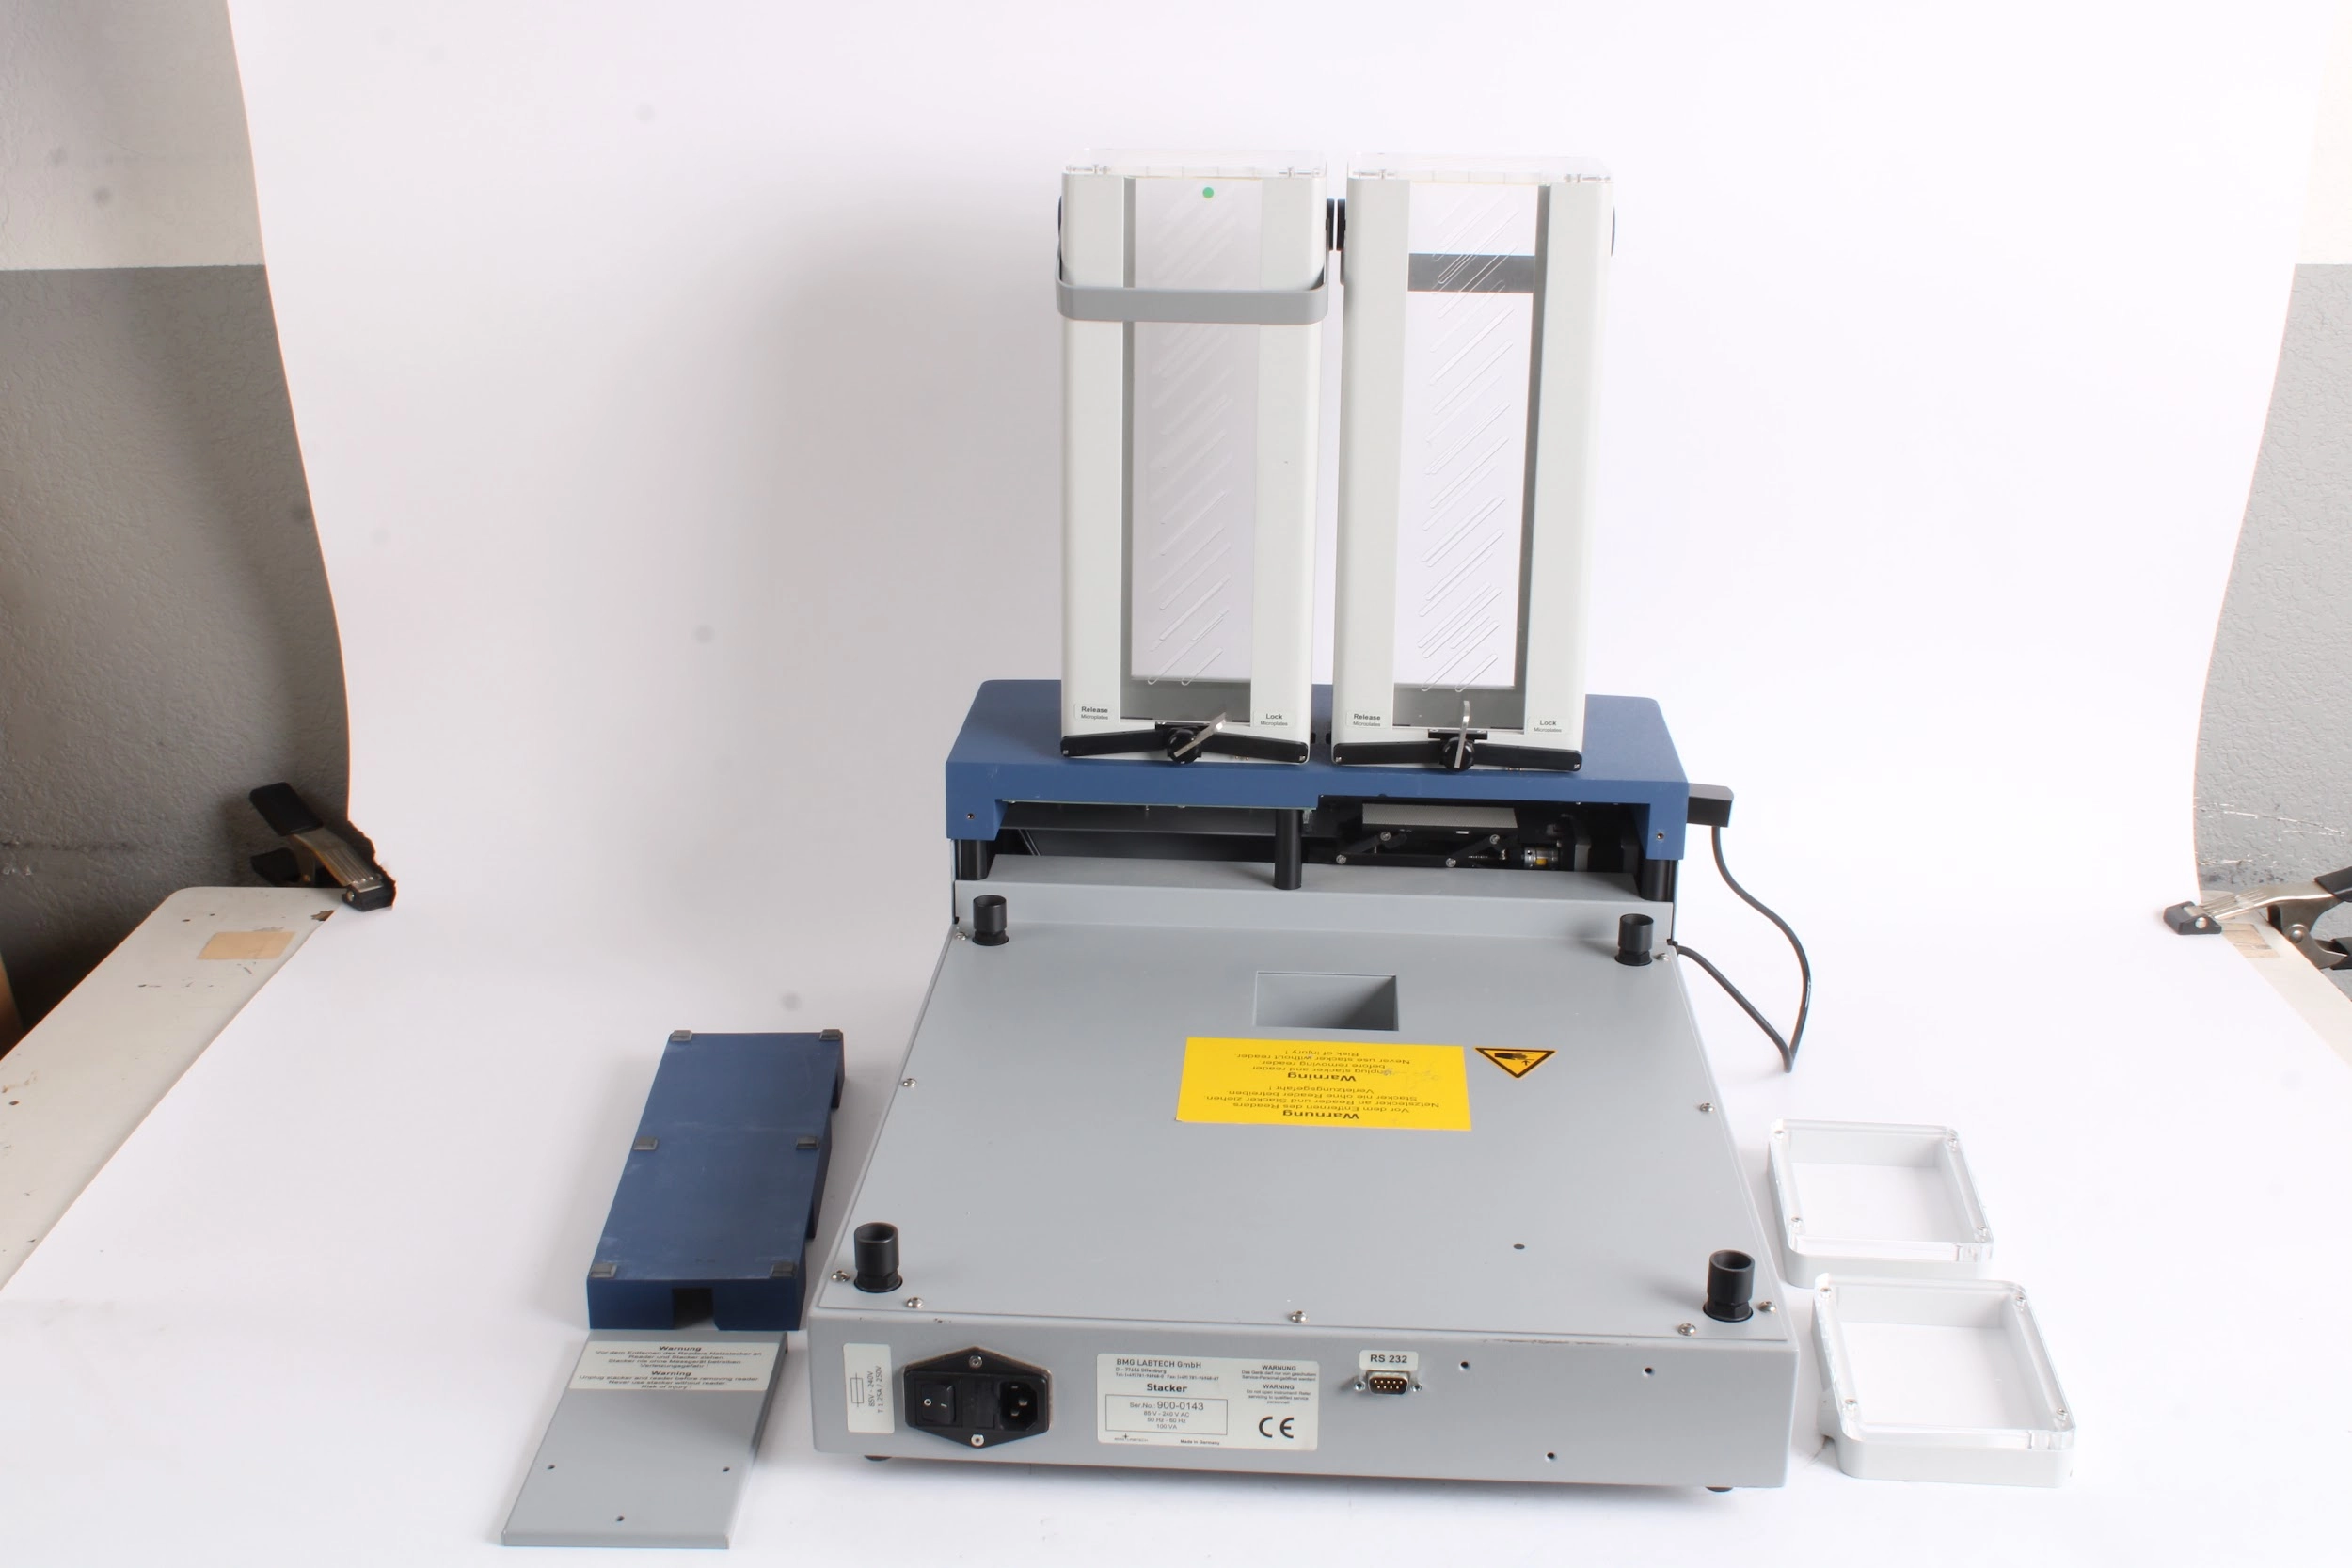 BMG Labtech GmbH Microplate Stacker Handling System W/ 2x Towers, 2x Cover, Tray